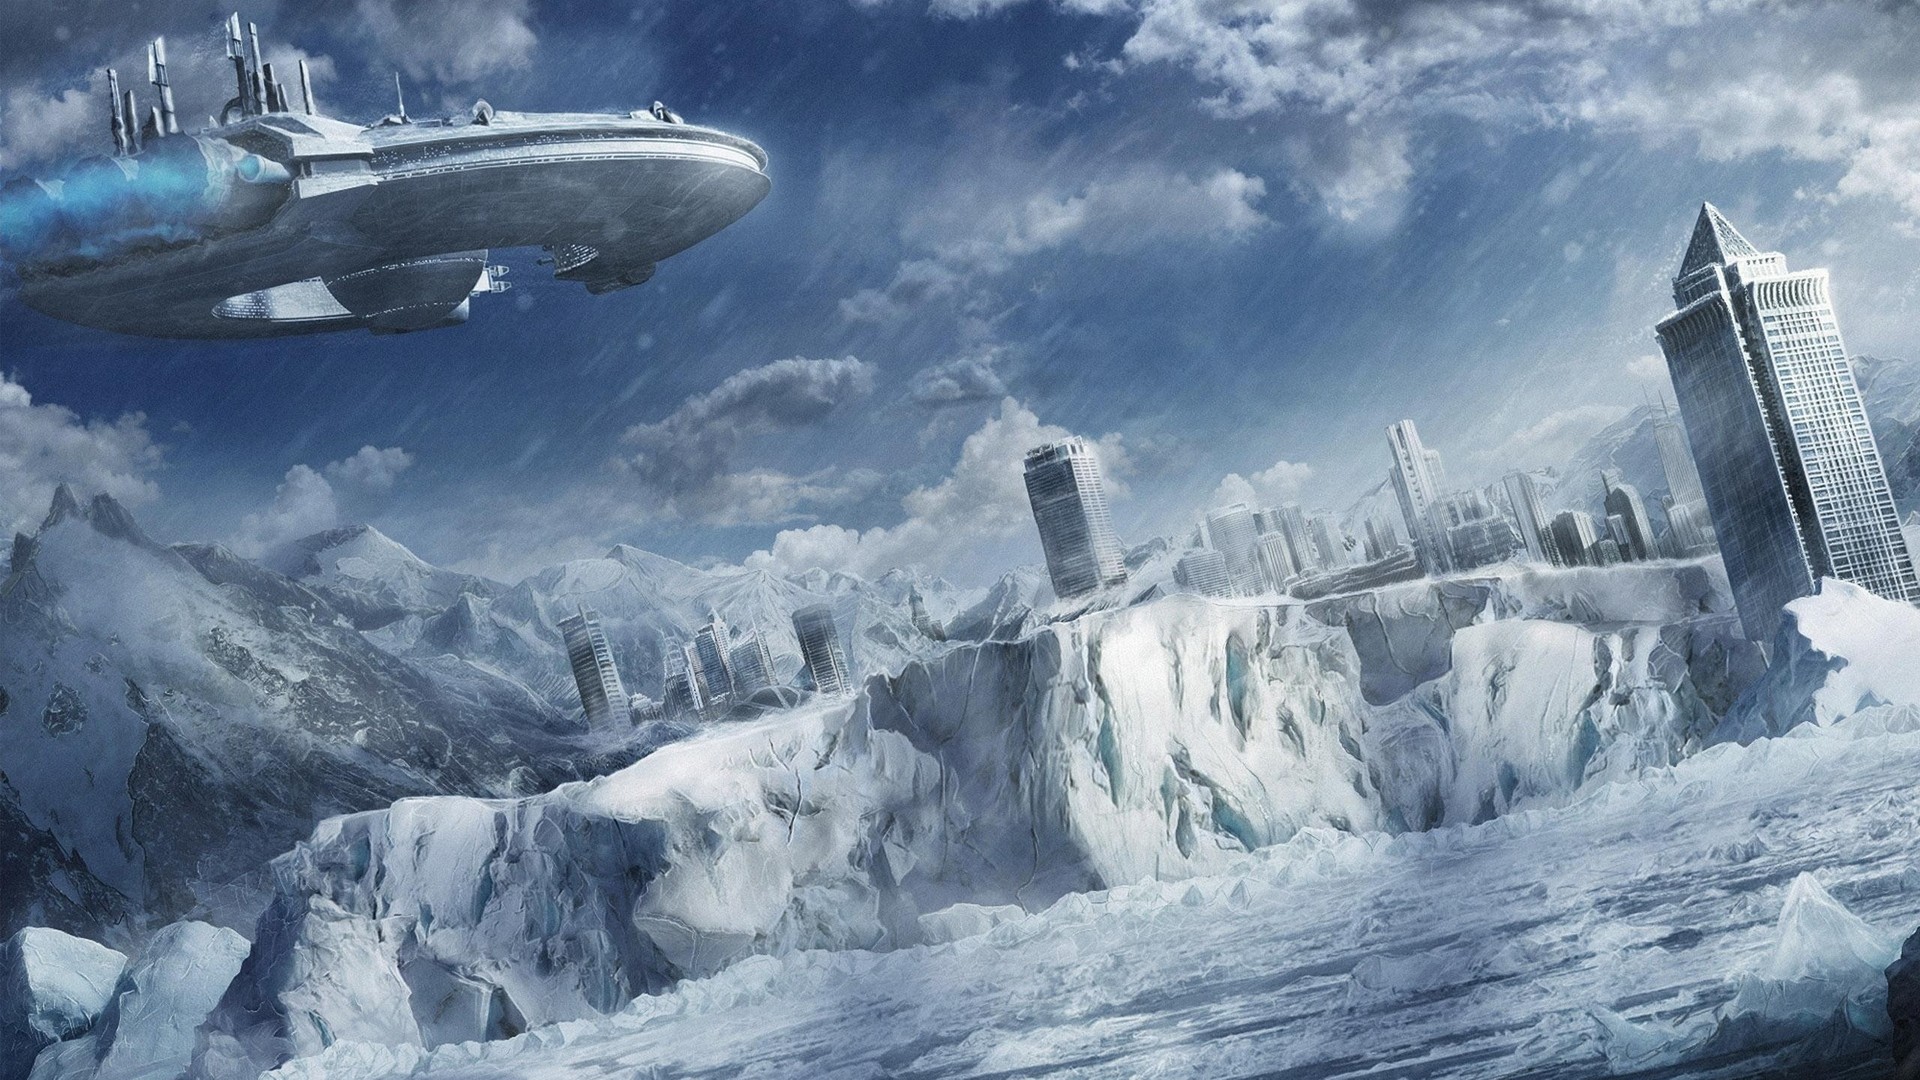 General 1920x1080 futuristic ice science fiction vehicle artwork Trade Federation (Star Wars) Star Wars Ships